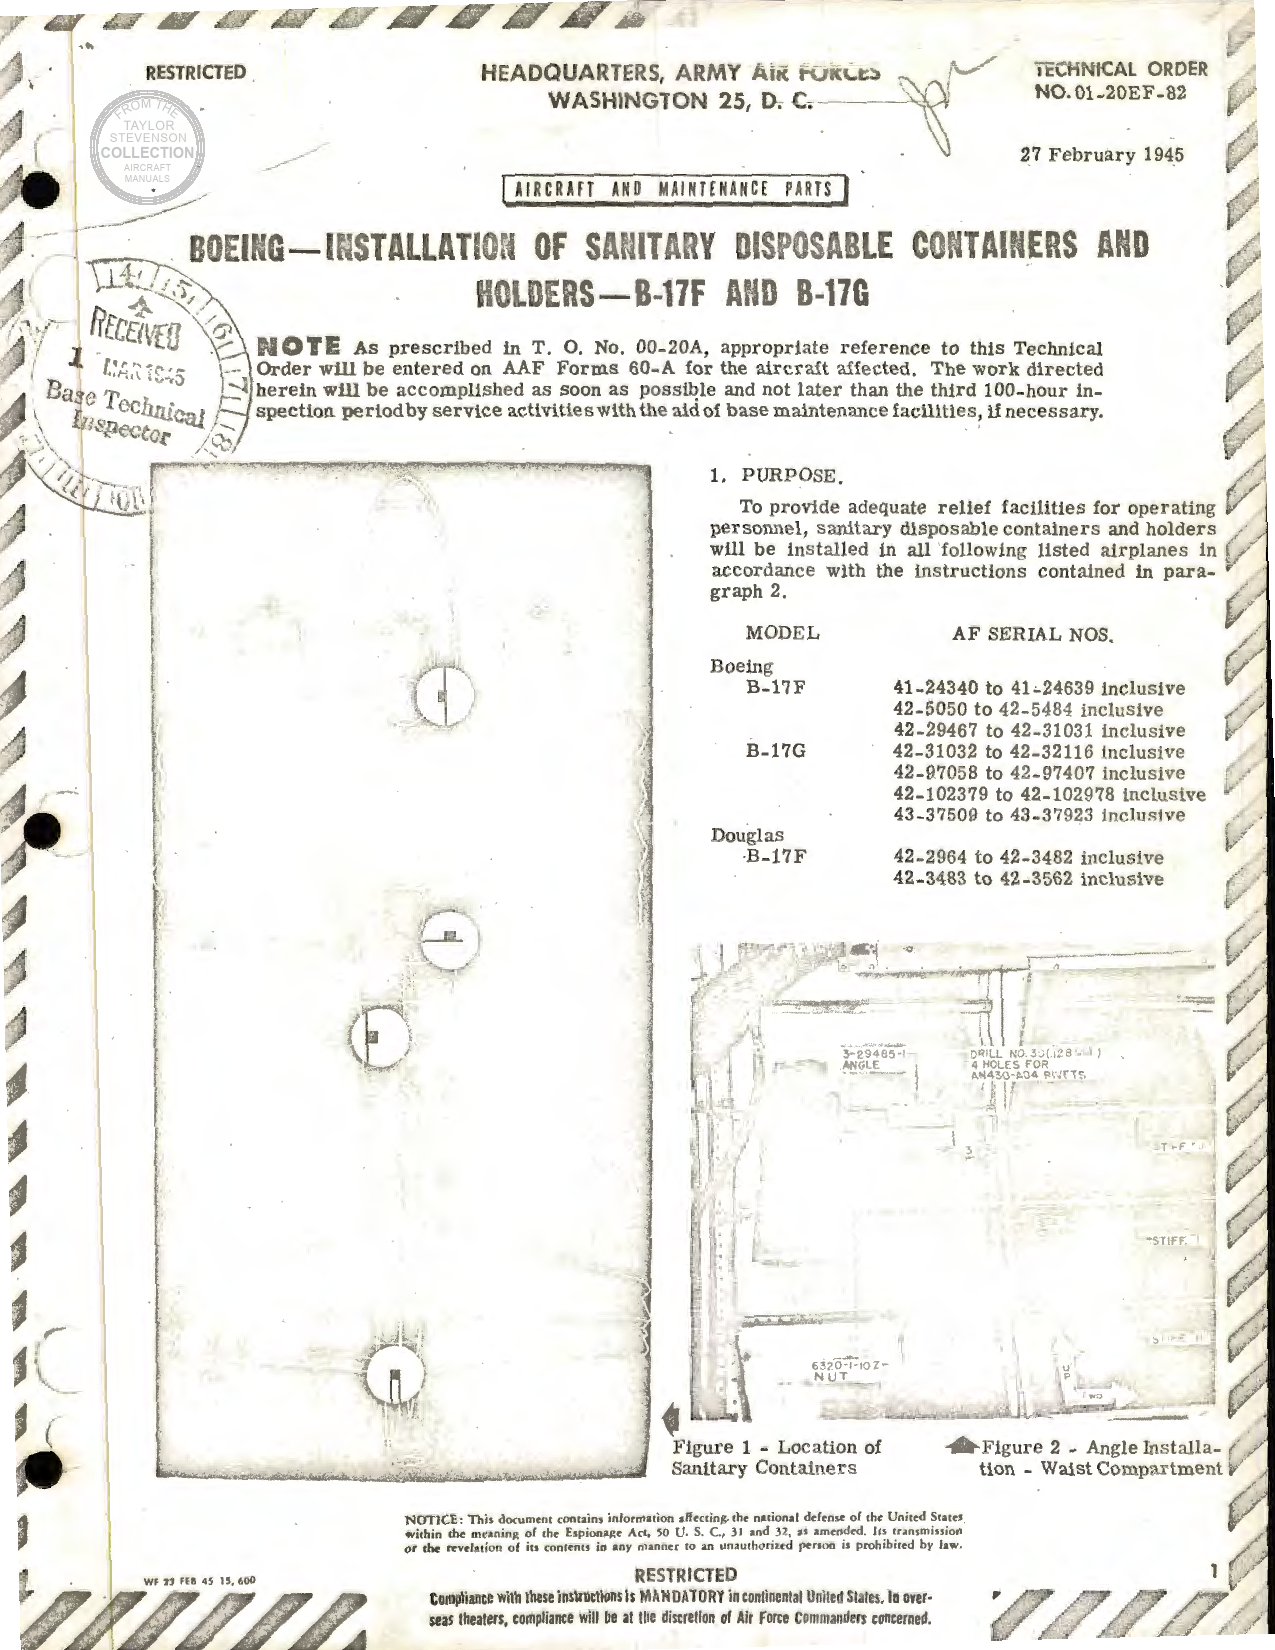 Sample page 1 from AirCorps Library document: Installation of Sanitary Disposable Containers and Holders for B-17F and B-17G